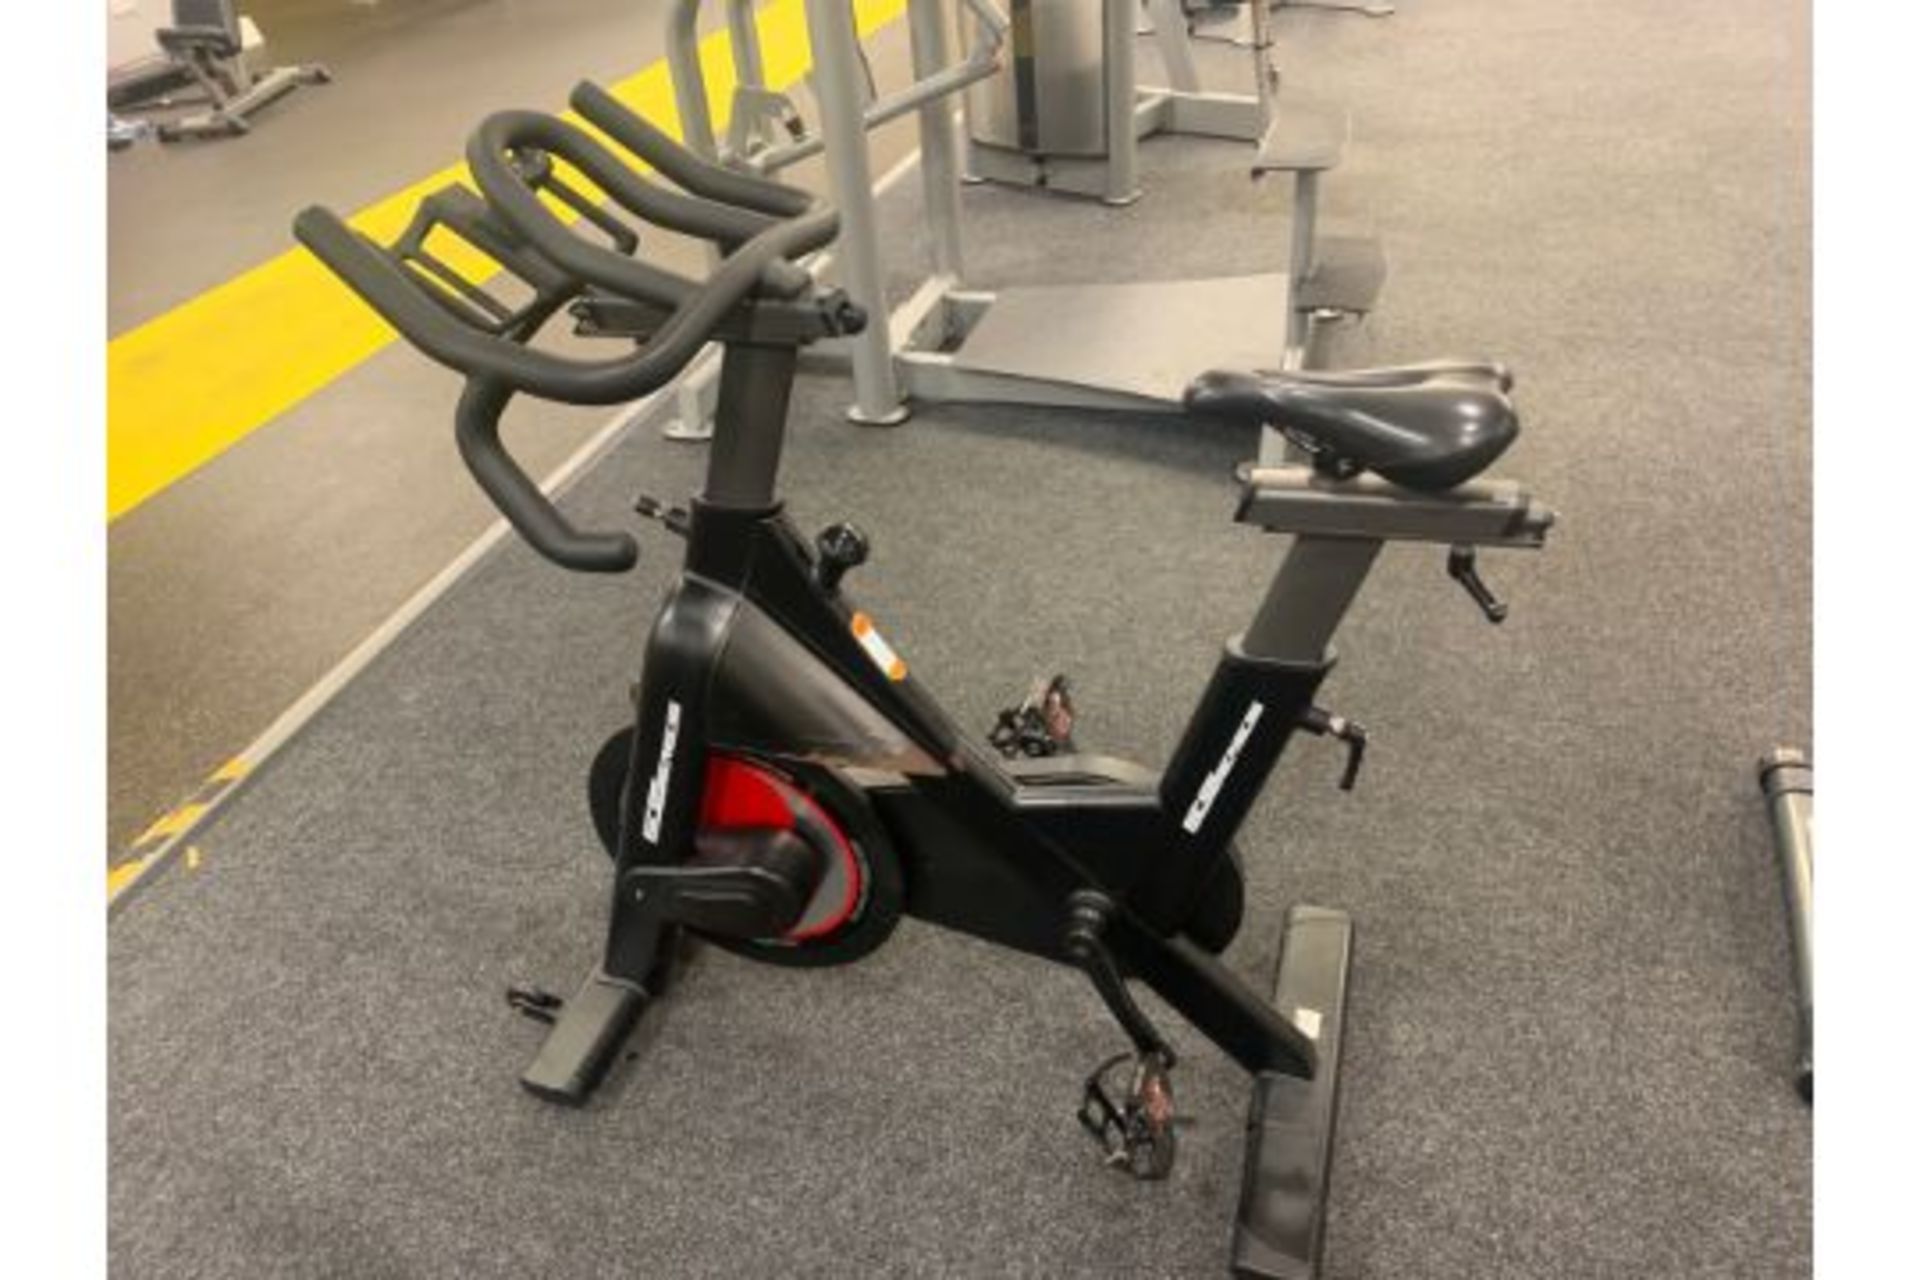 F Series Spin Bike - Image 3 of 4